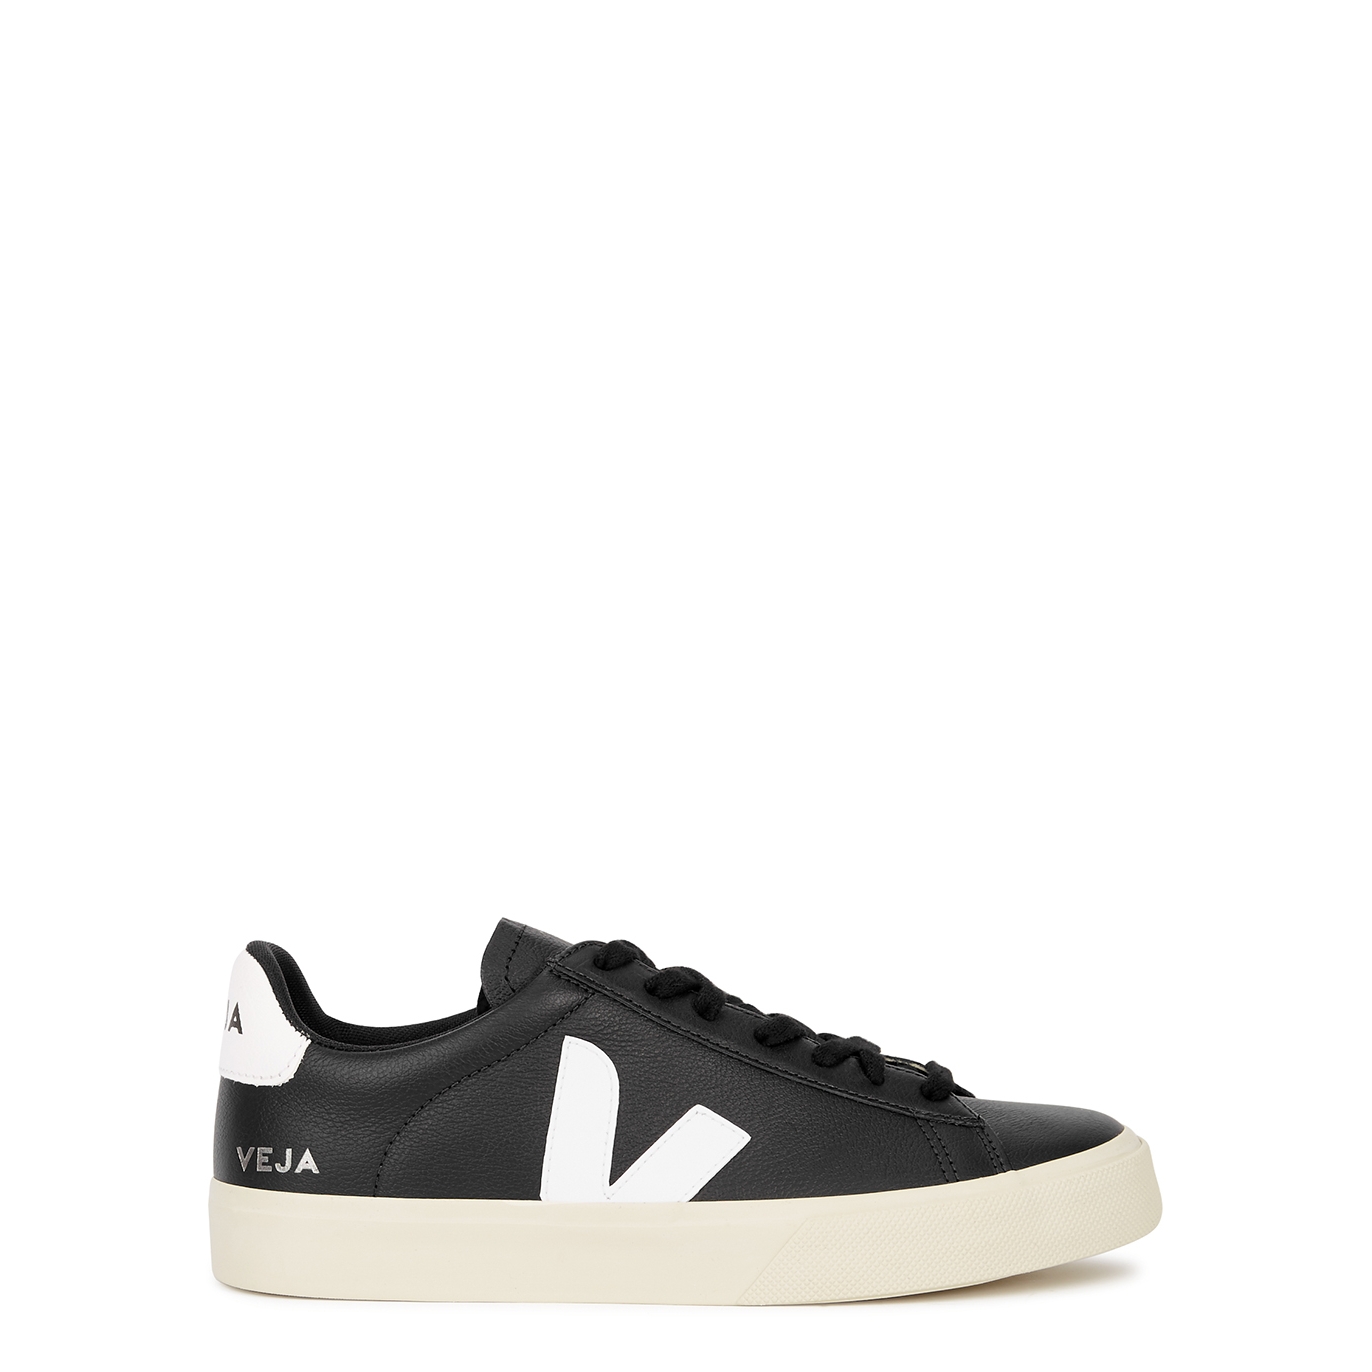 Veja Campo Black Leather Sneakers - Black And White - 6